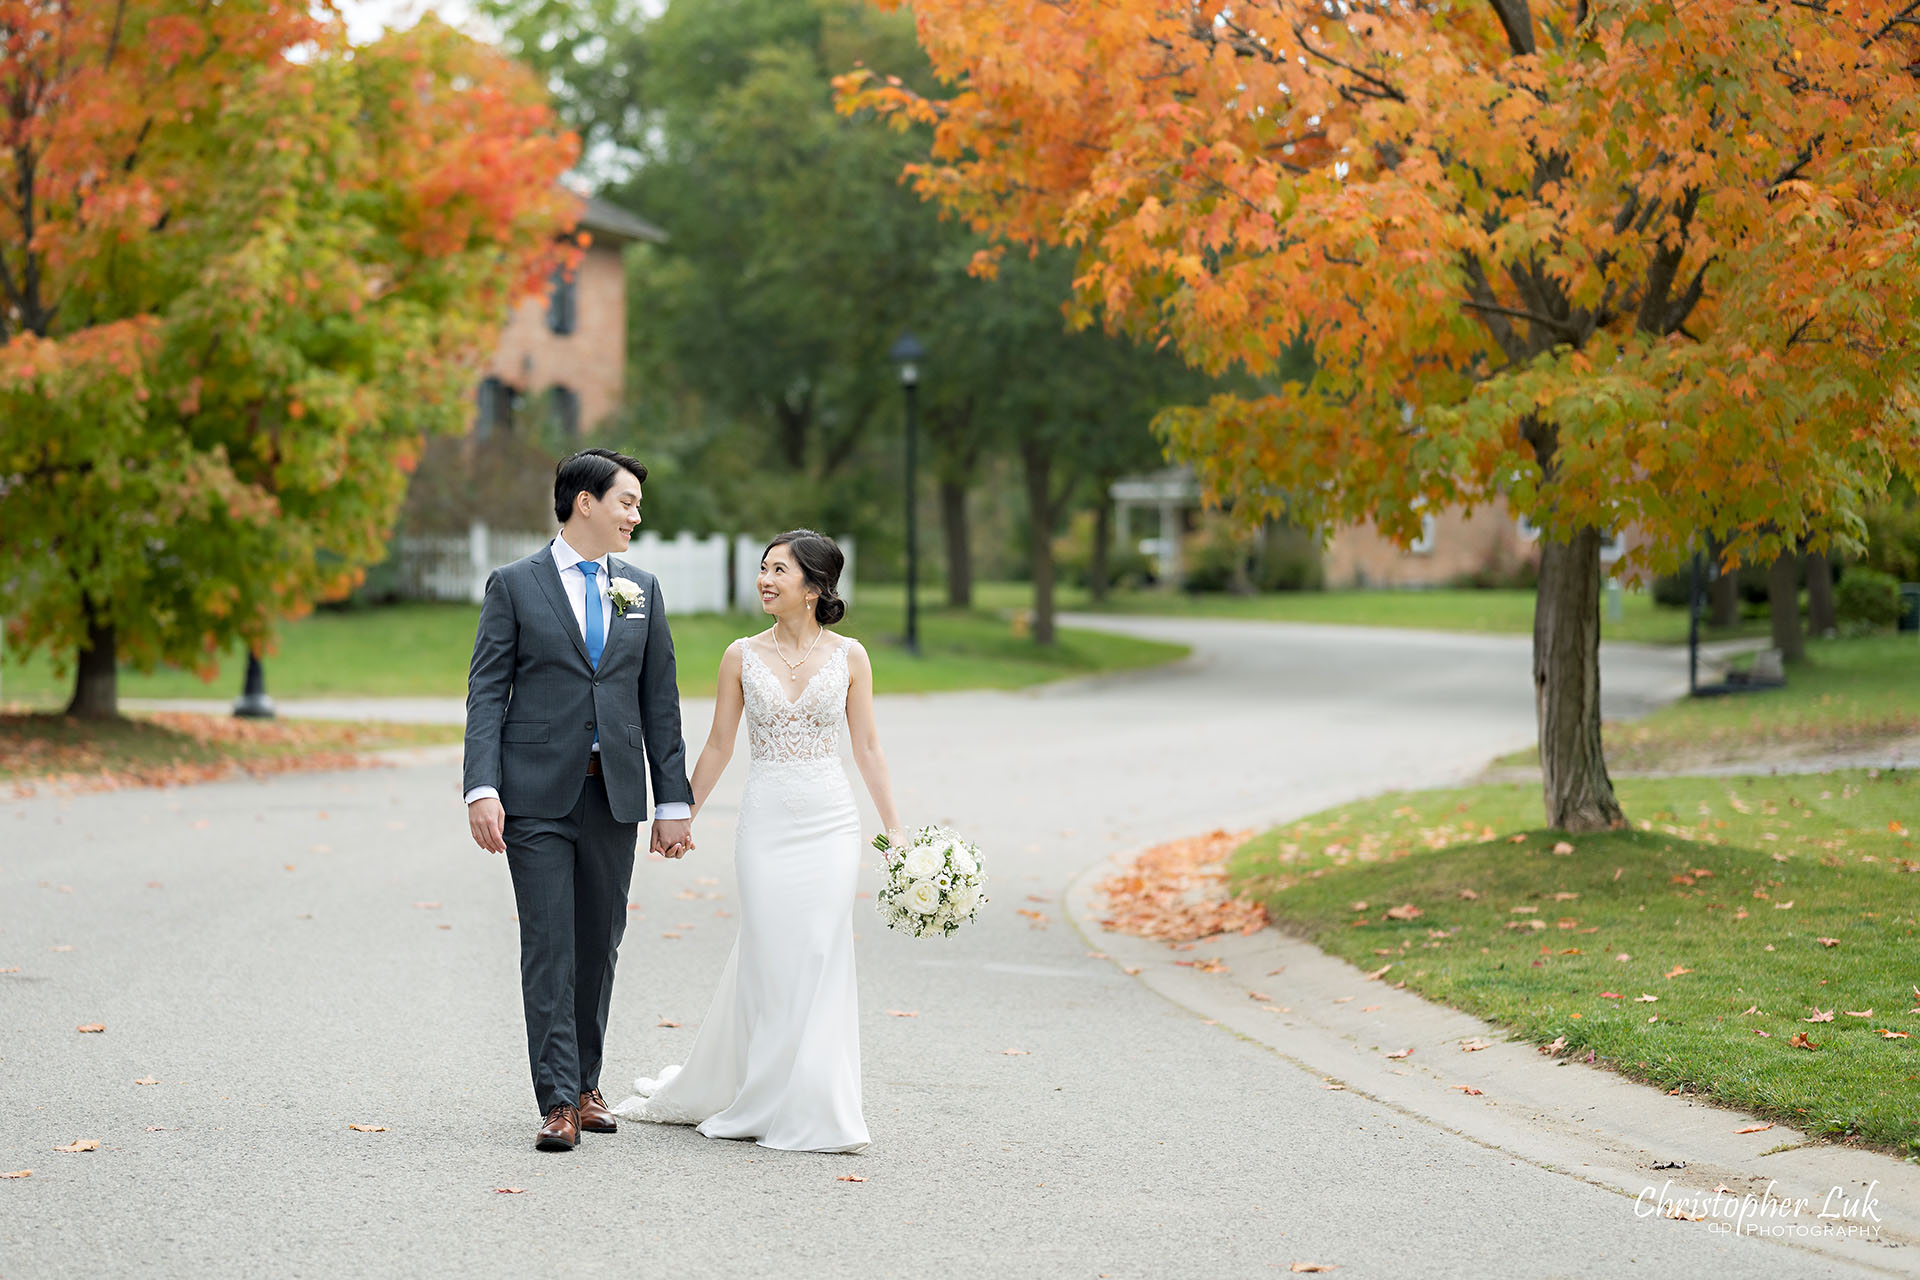 Bride Groom Wedding Autumn Fall Leaves Holding Hands Walking Together Candid Natural Organic Photojournalistic Landscape Streetscape